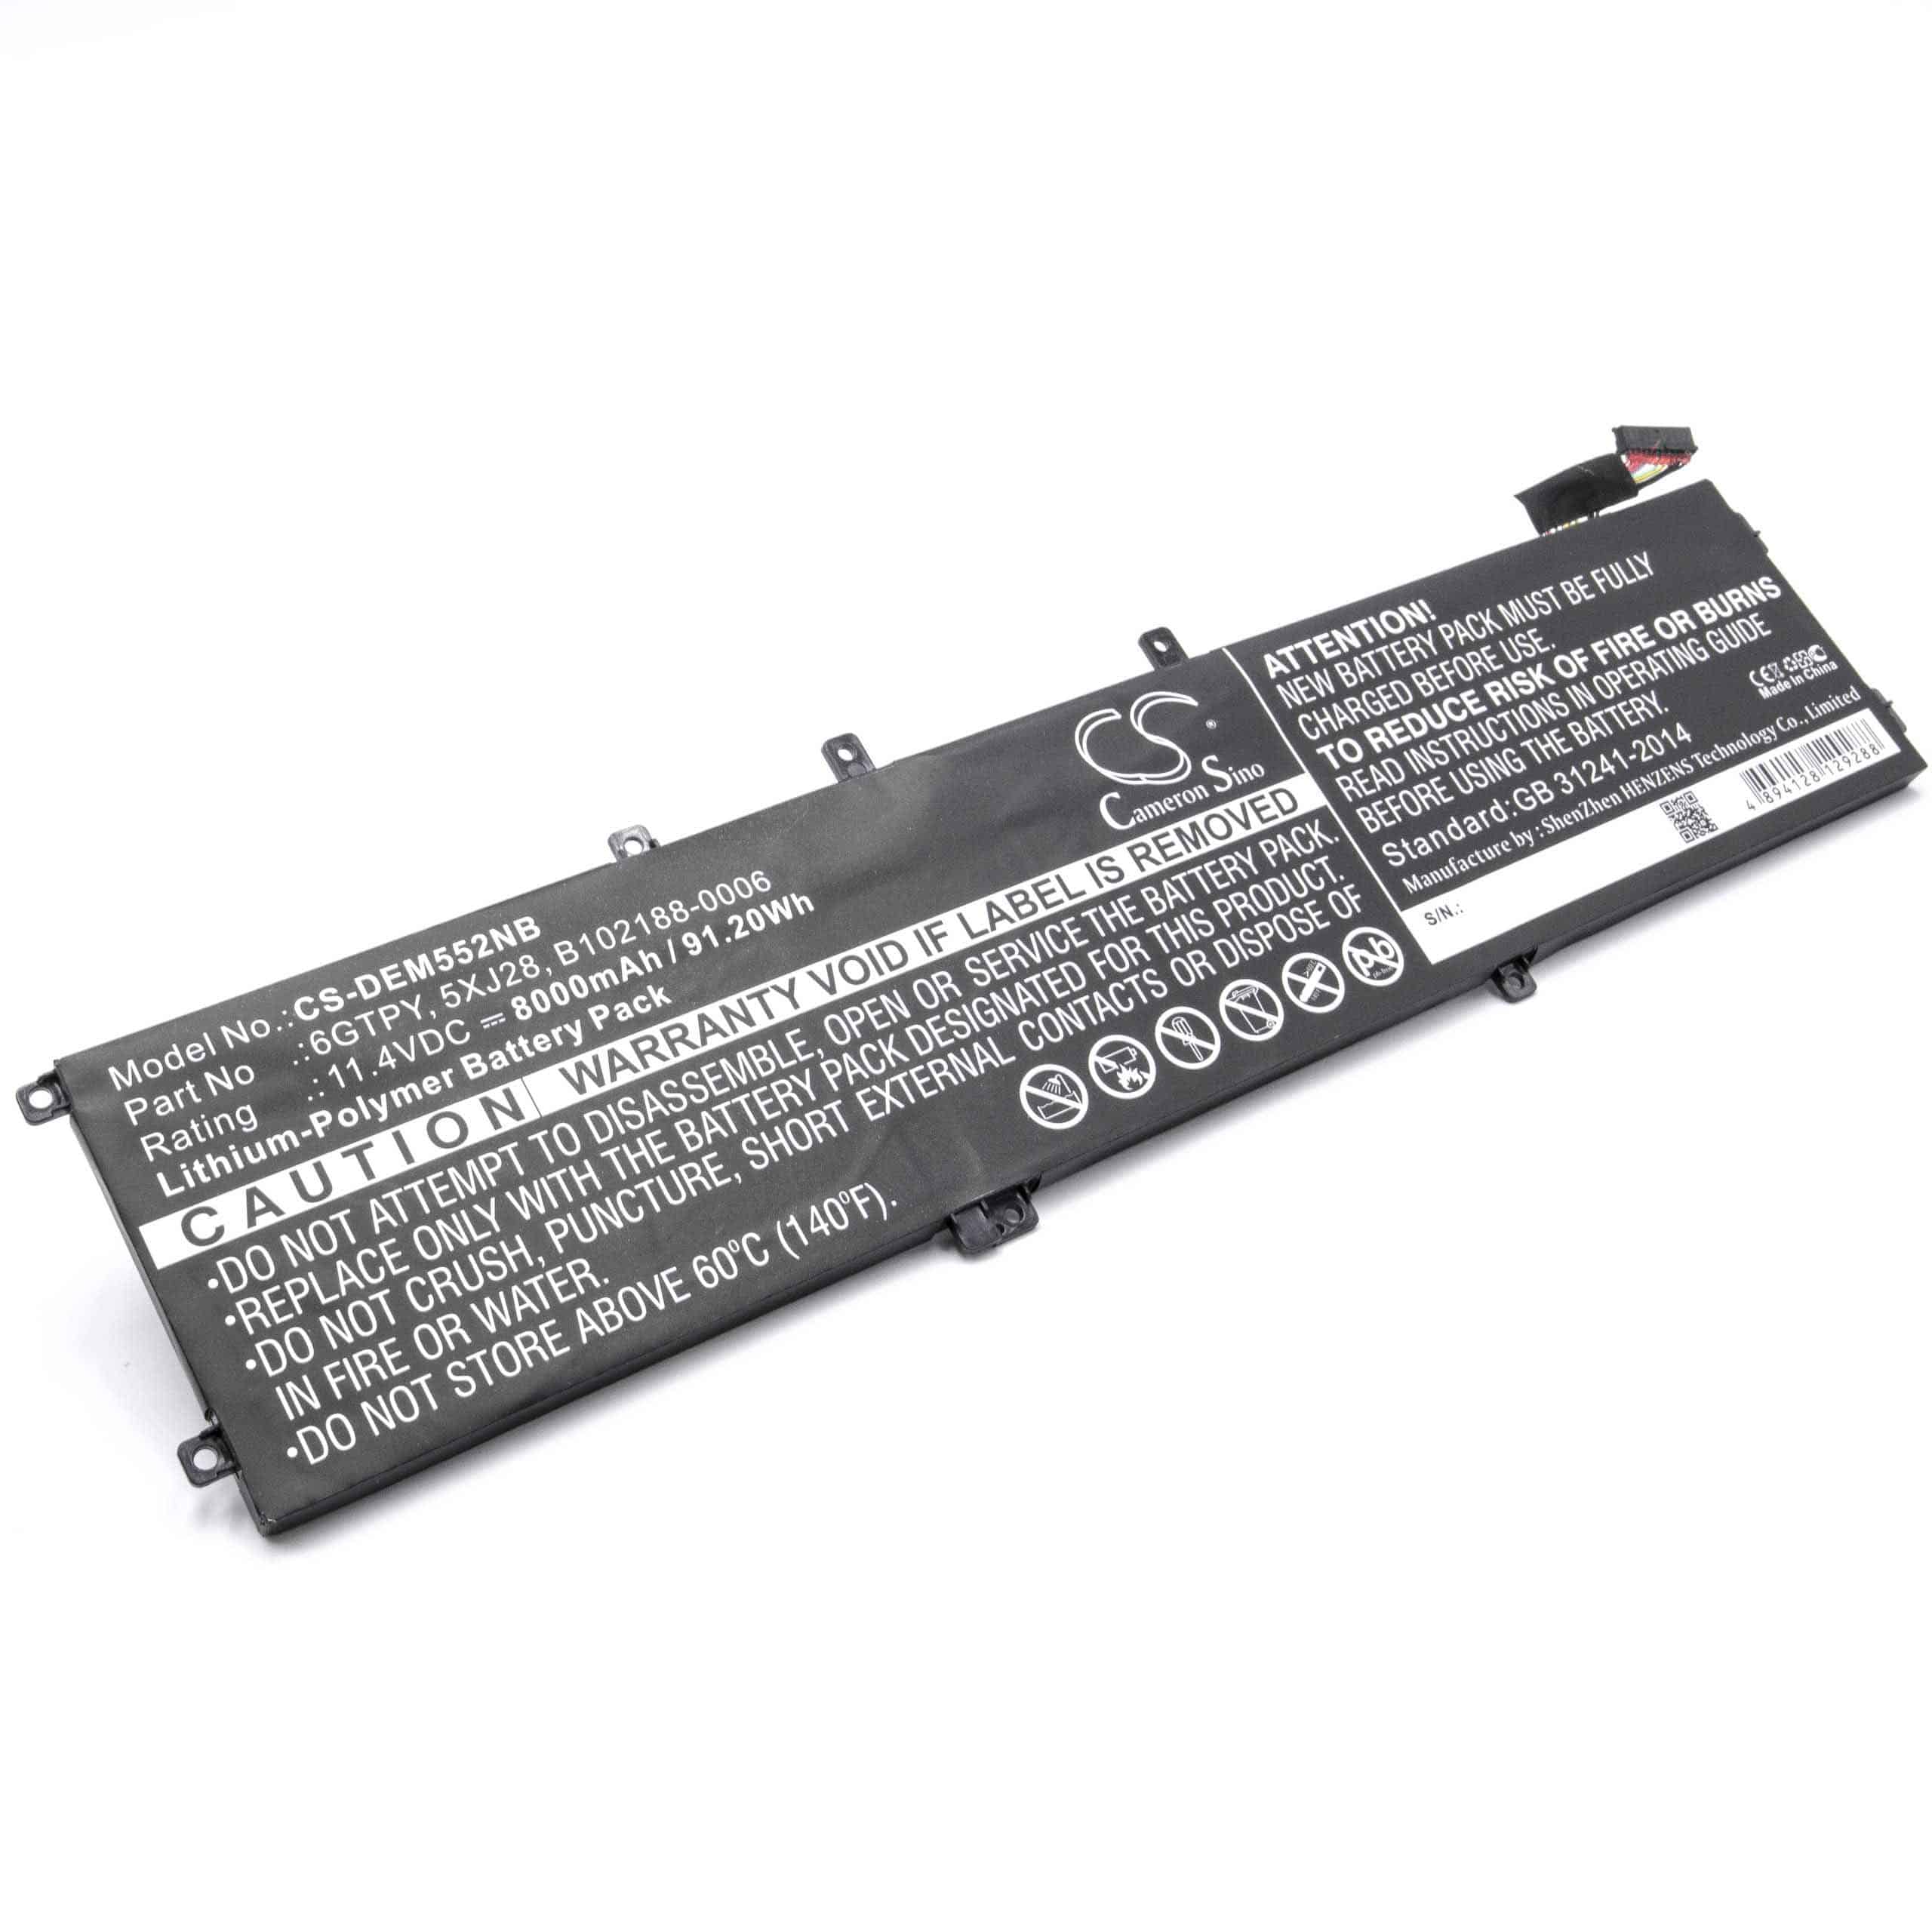 Notebook Battery Replacement for Dell 05041C, 5D91C, 6GTPY, 5041C, 5XJ28, 0GPM03 - 8000mAh 11.4V Li-polymer